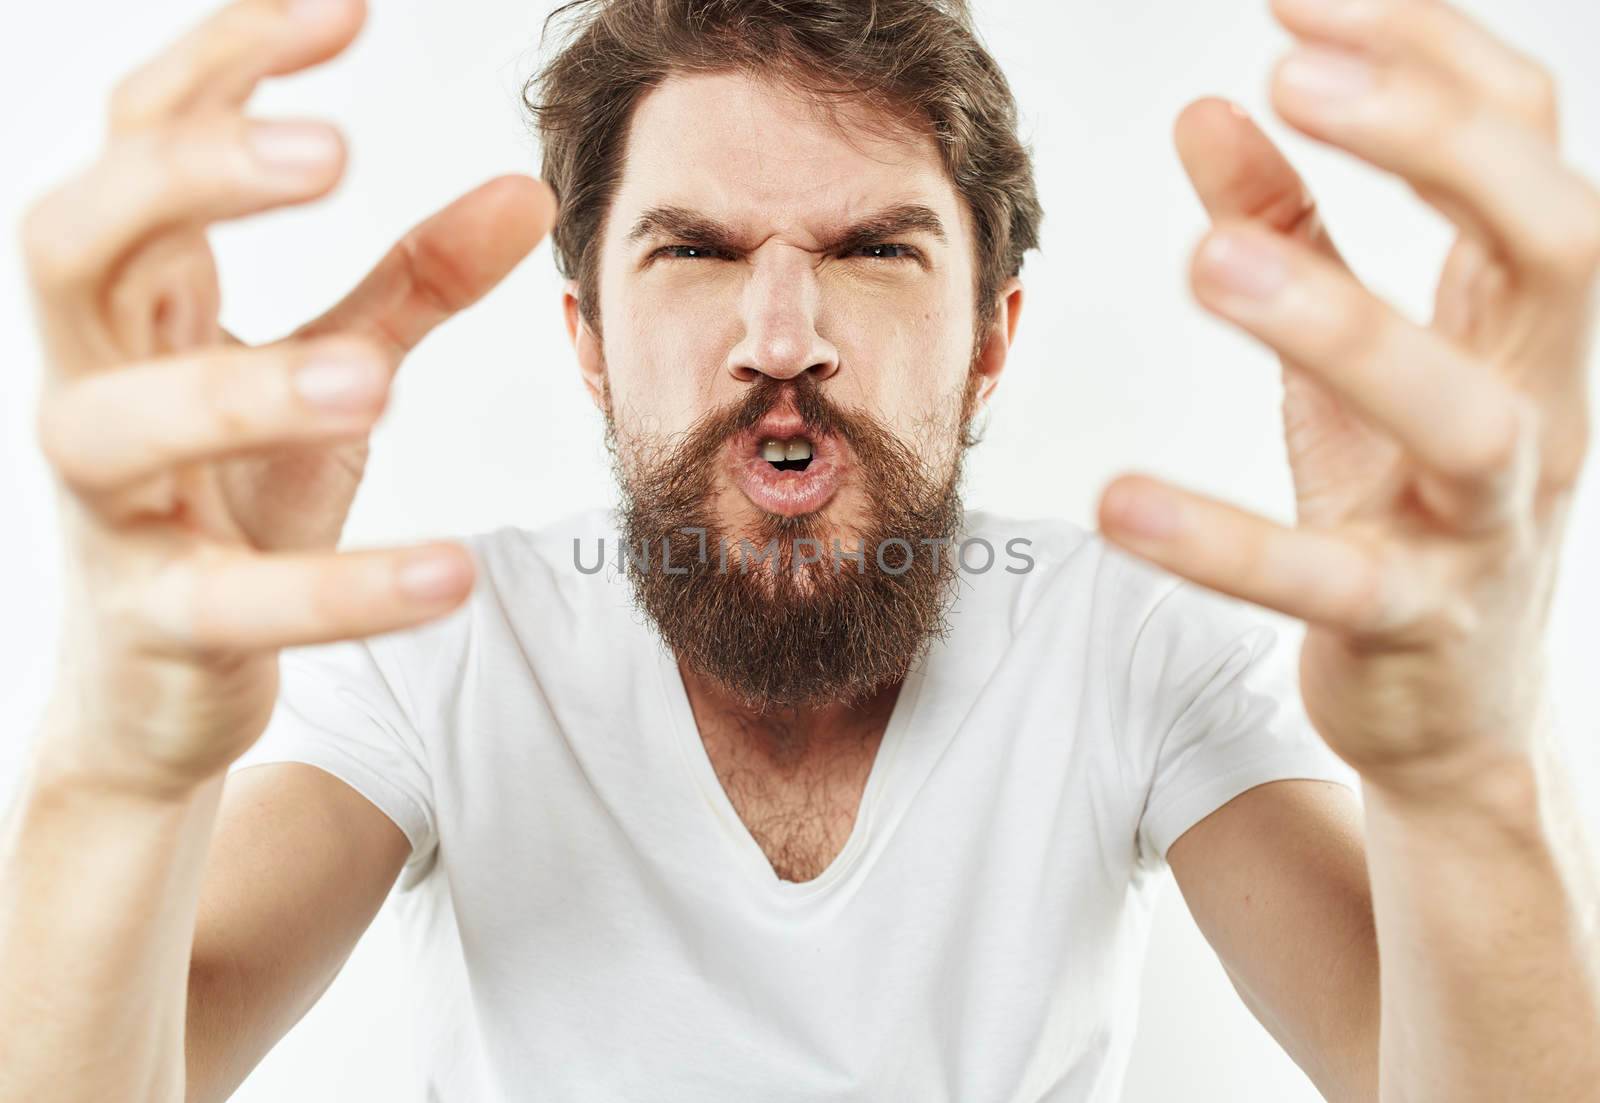 Emotional man on a white background in a T-shirt shows a gesture with his hands. High quality photo